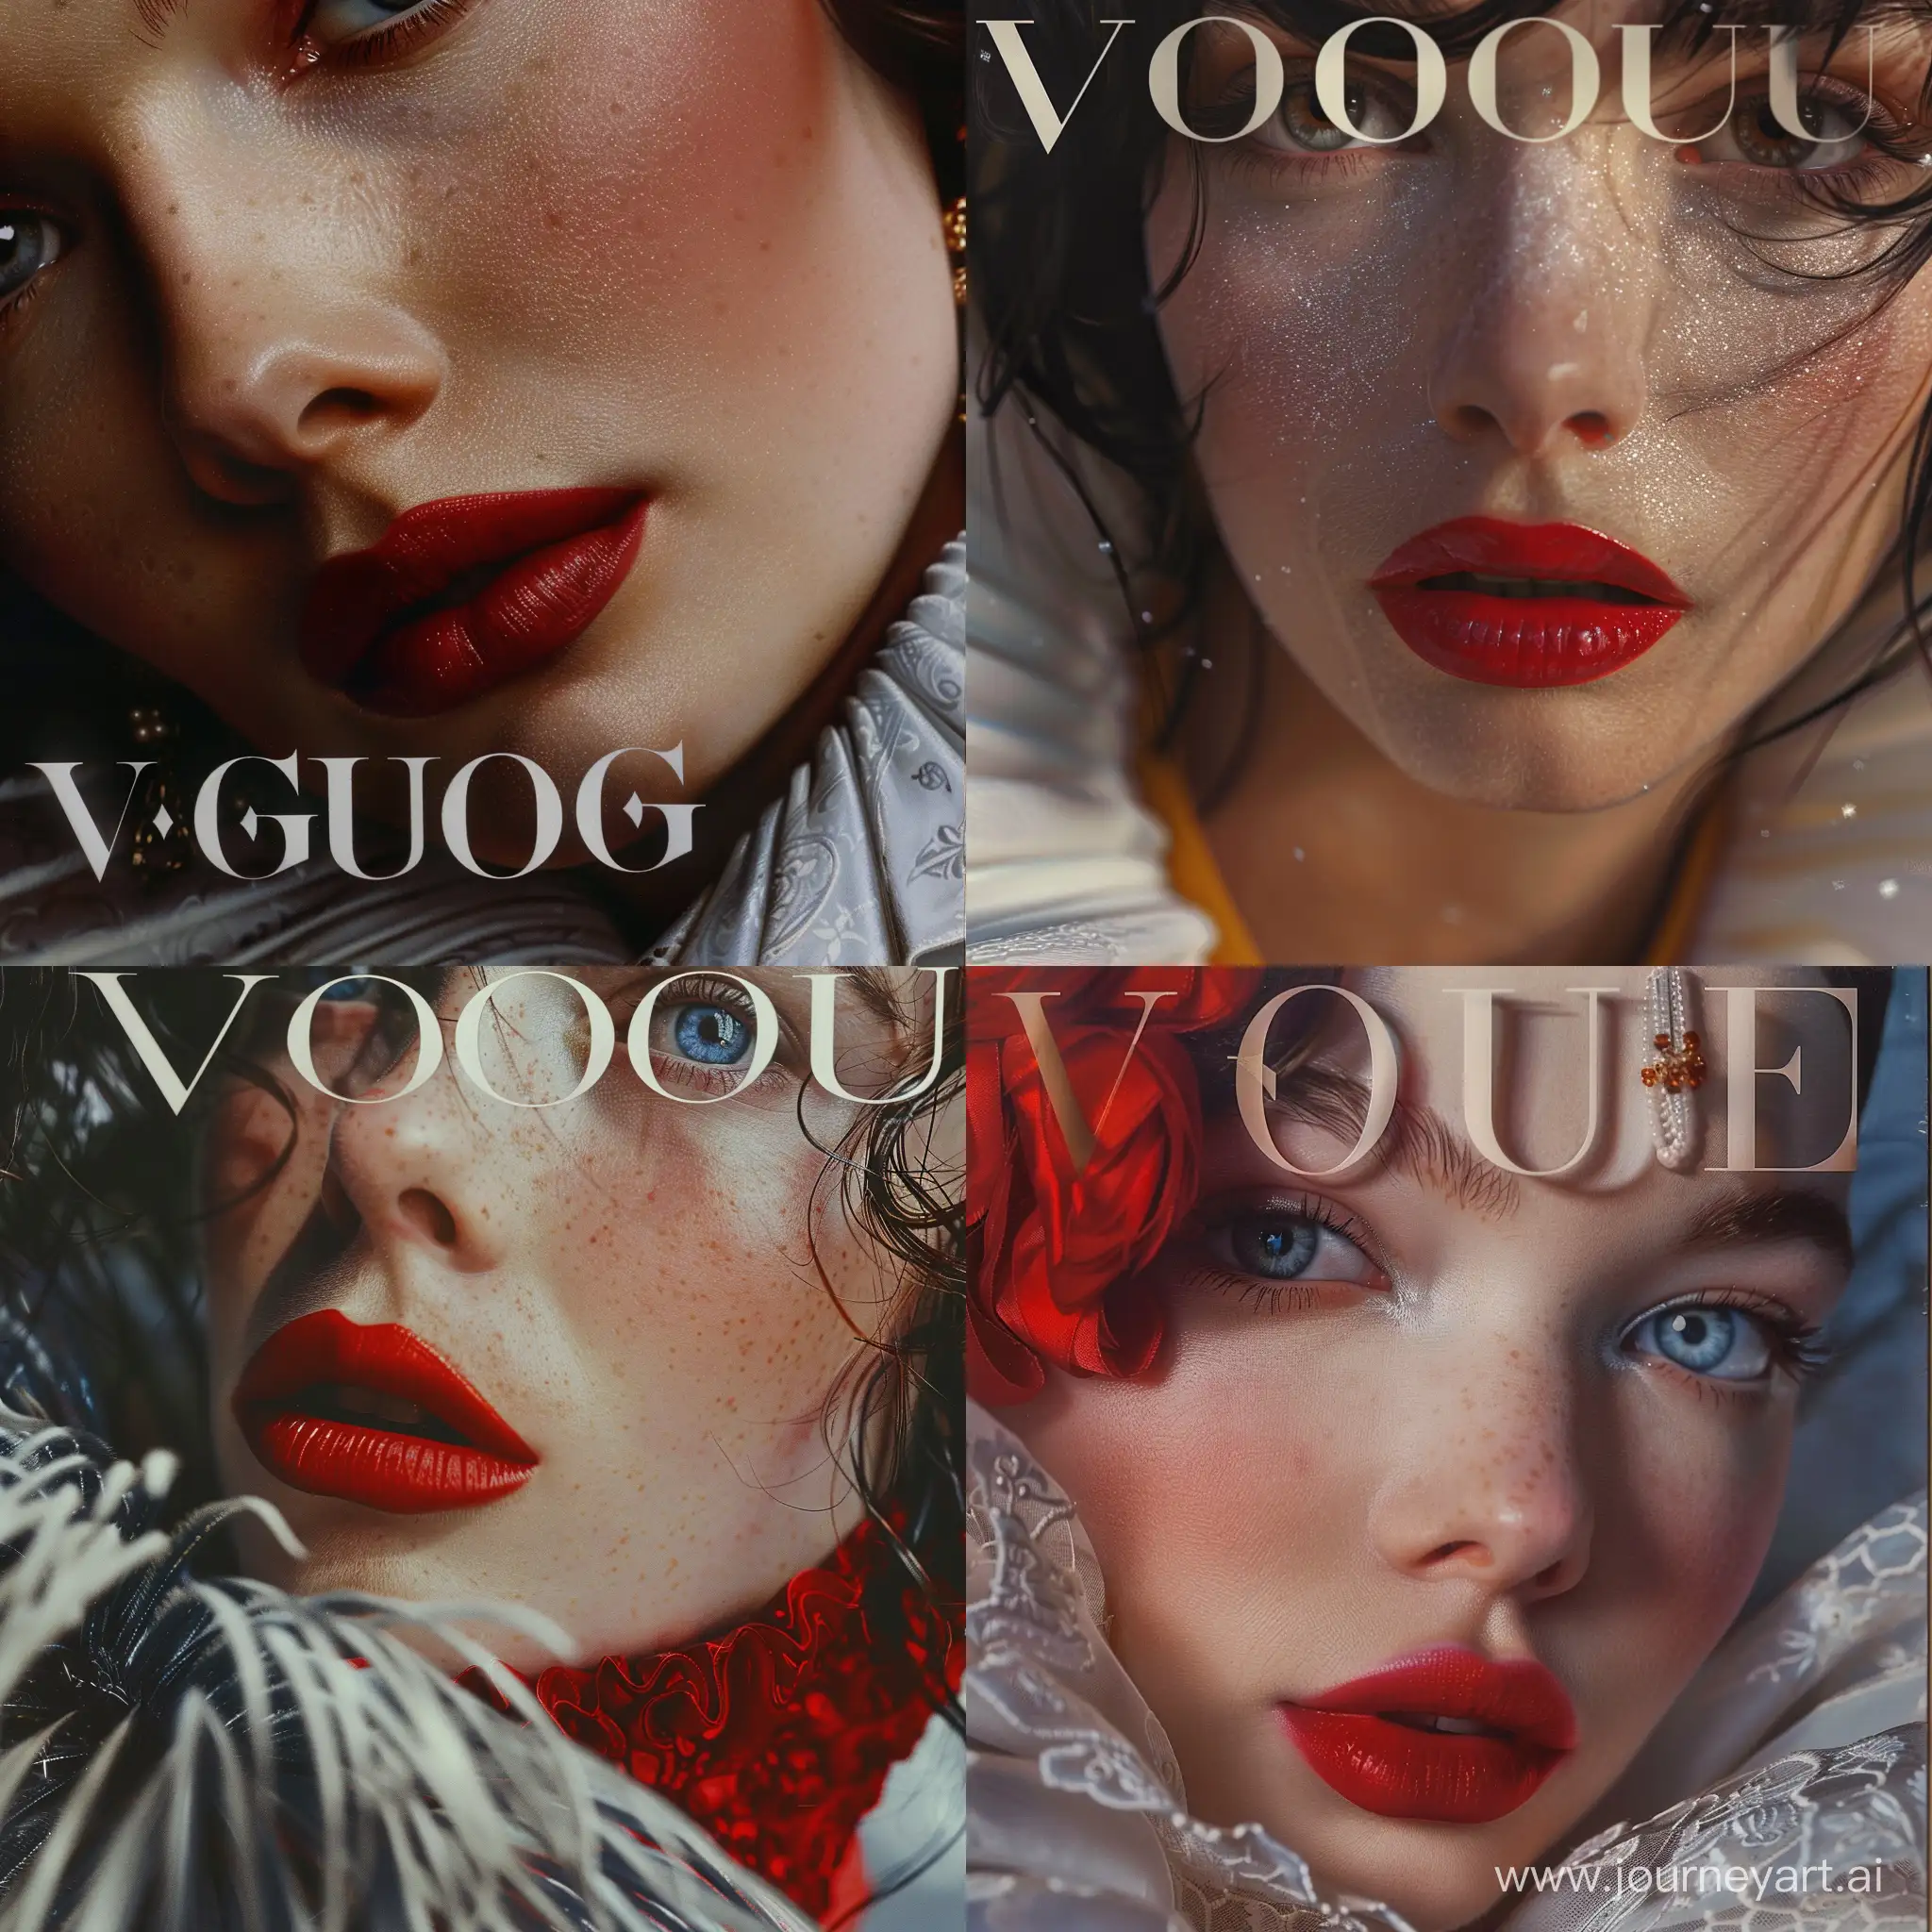 Vogue-Fashion-Cover-Featuring-Photorealistic-Snow-White-Inspired-by-Tim-Walker